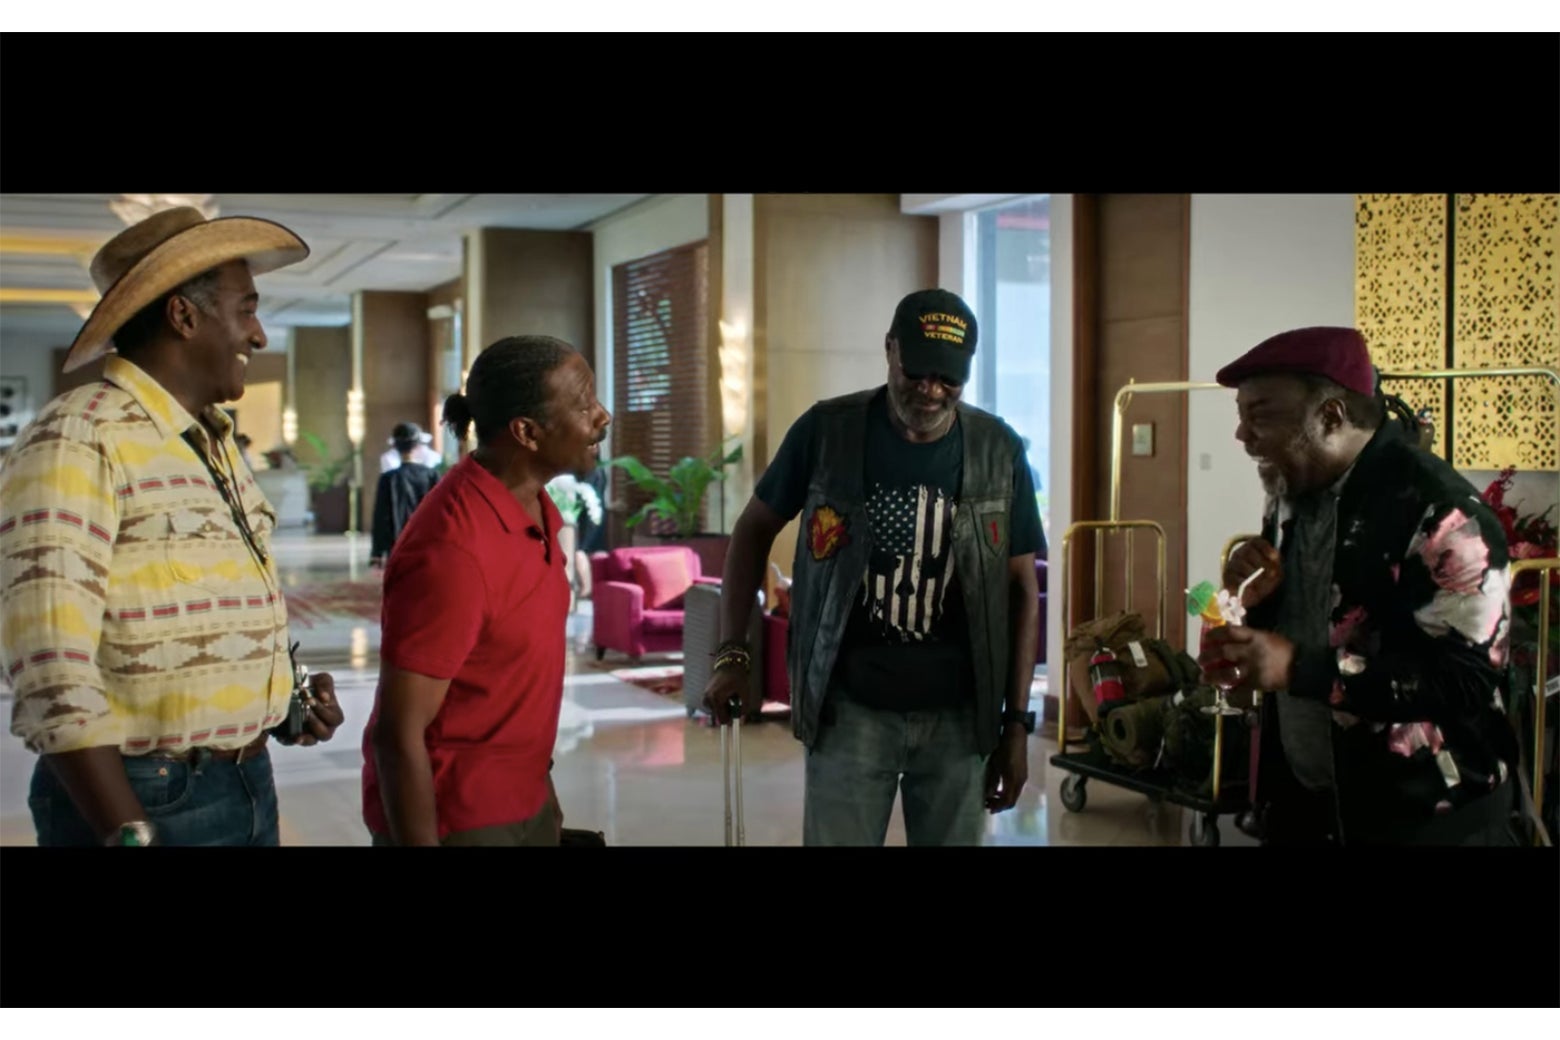 A scene from Da 5 Bloods showing four men at an airport